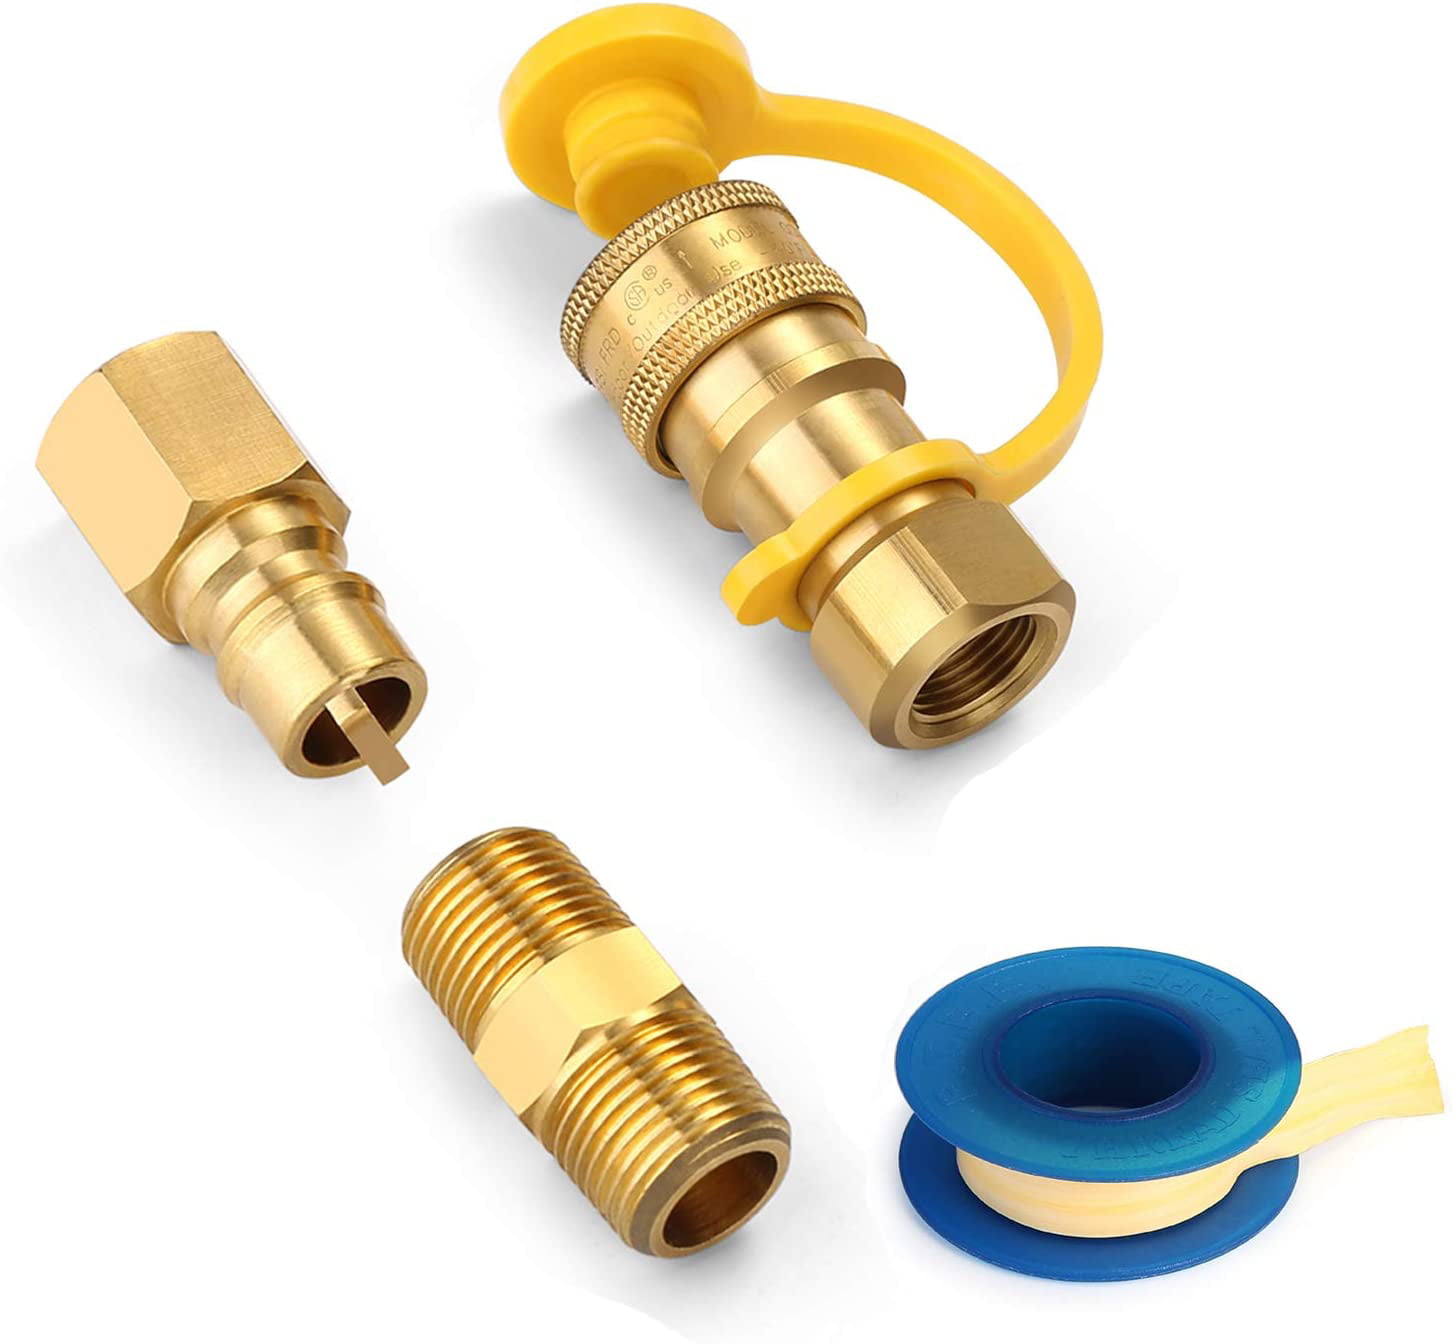 Propane Gas Quick Connect Adapter Connector Pipe Fitting 1/4" Male Thread 